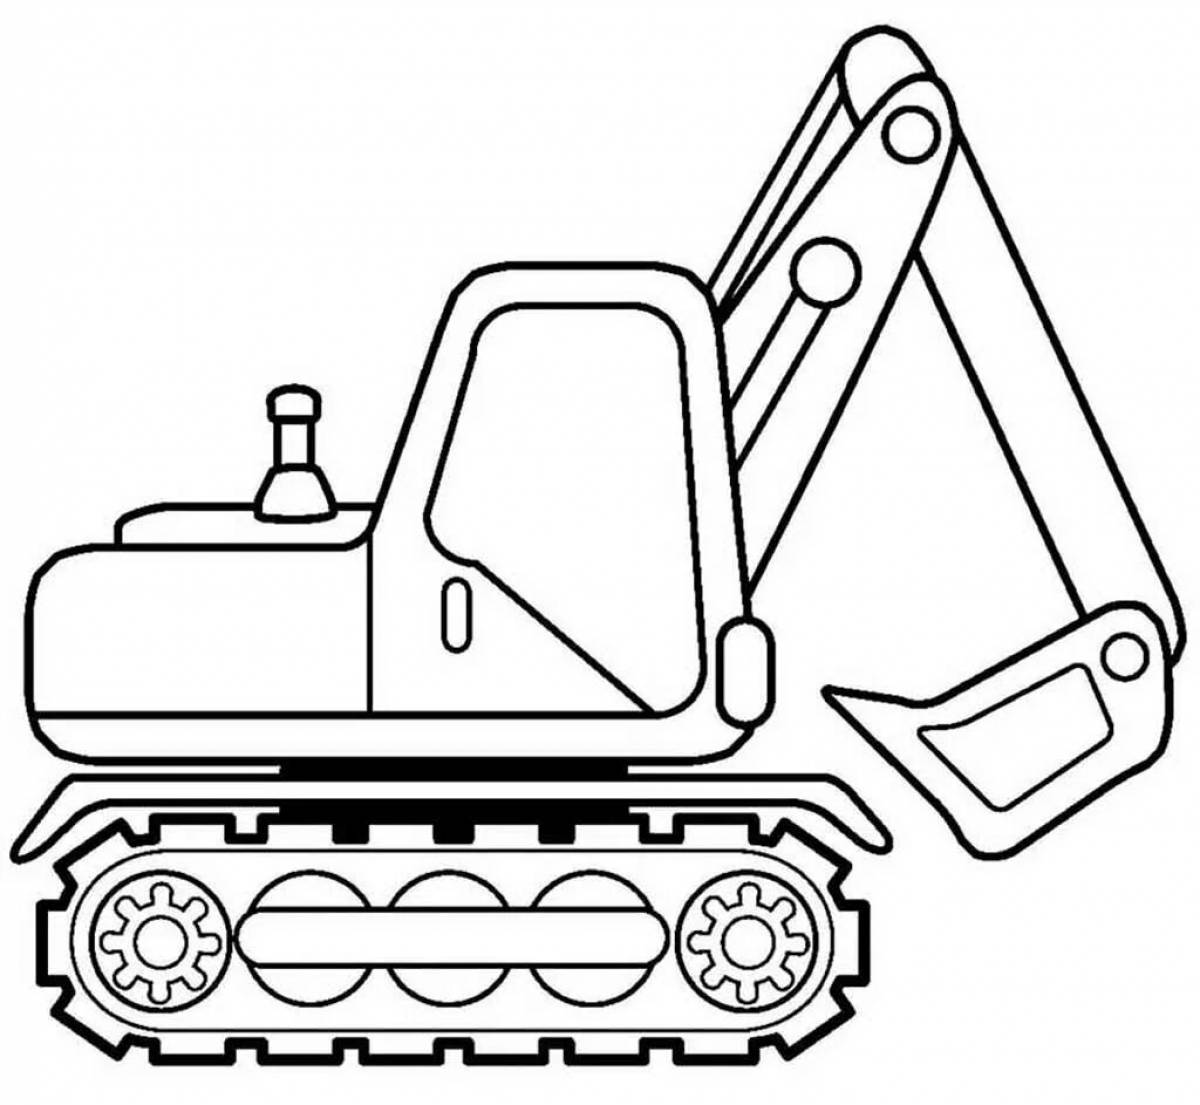 A wonderful excavator coloring book for 4-5 year olds